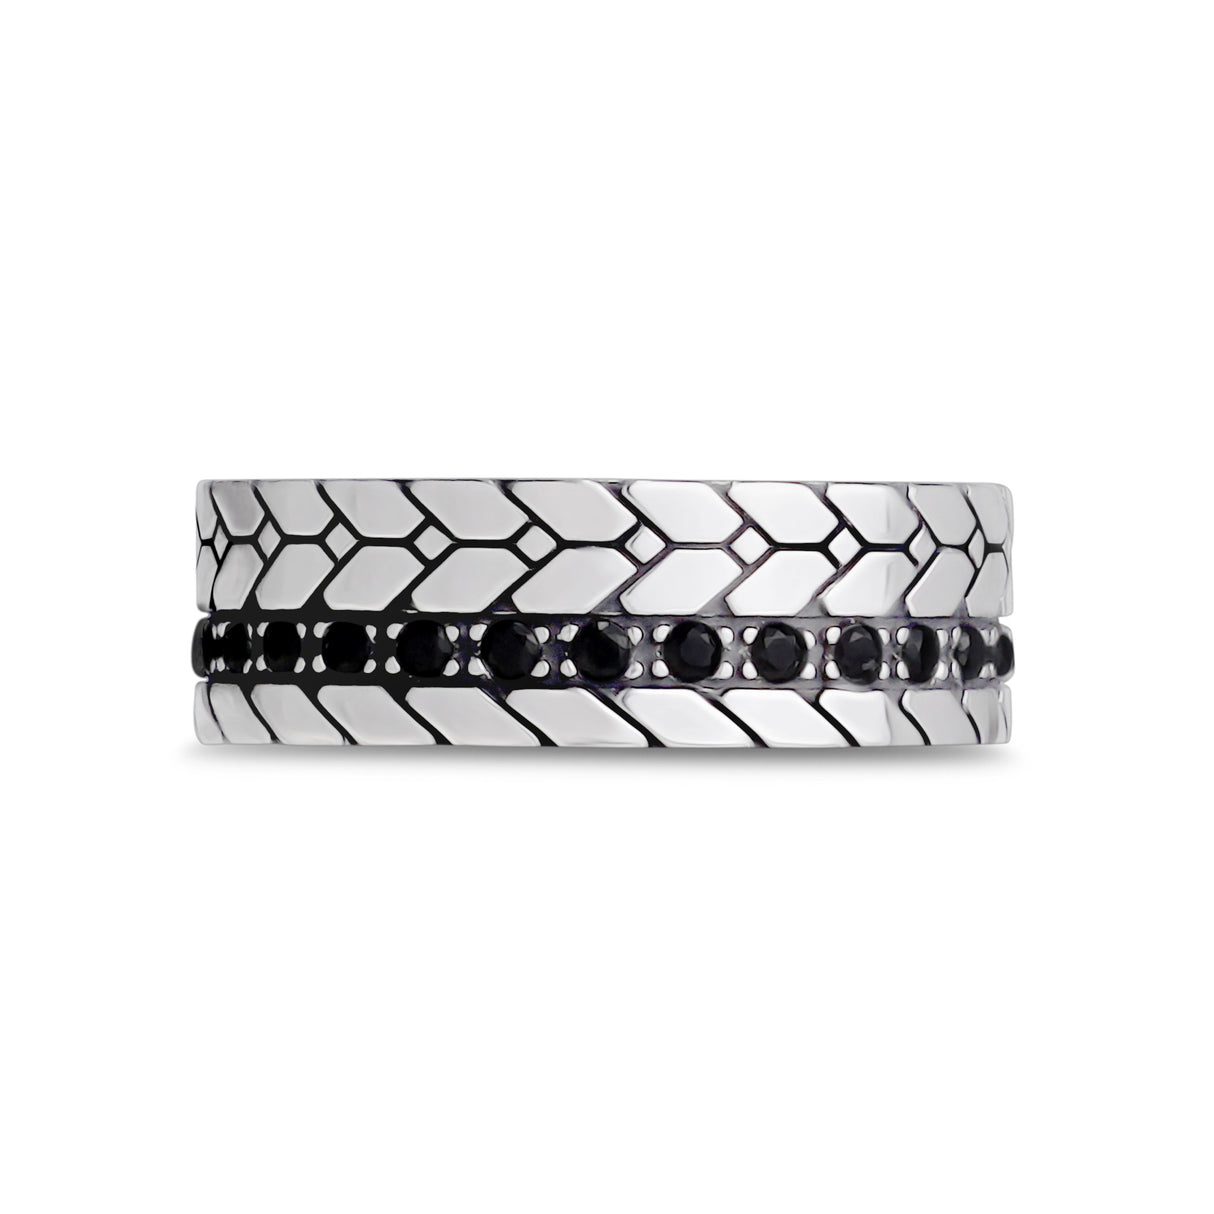 7mm Black Stone Detailed Band - Men Ring - The Steel Shop